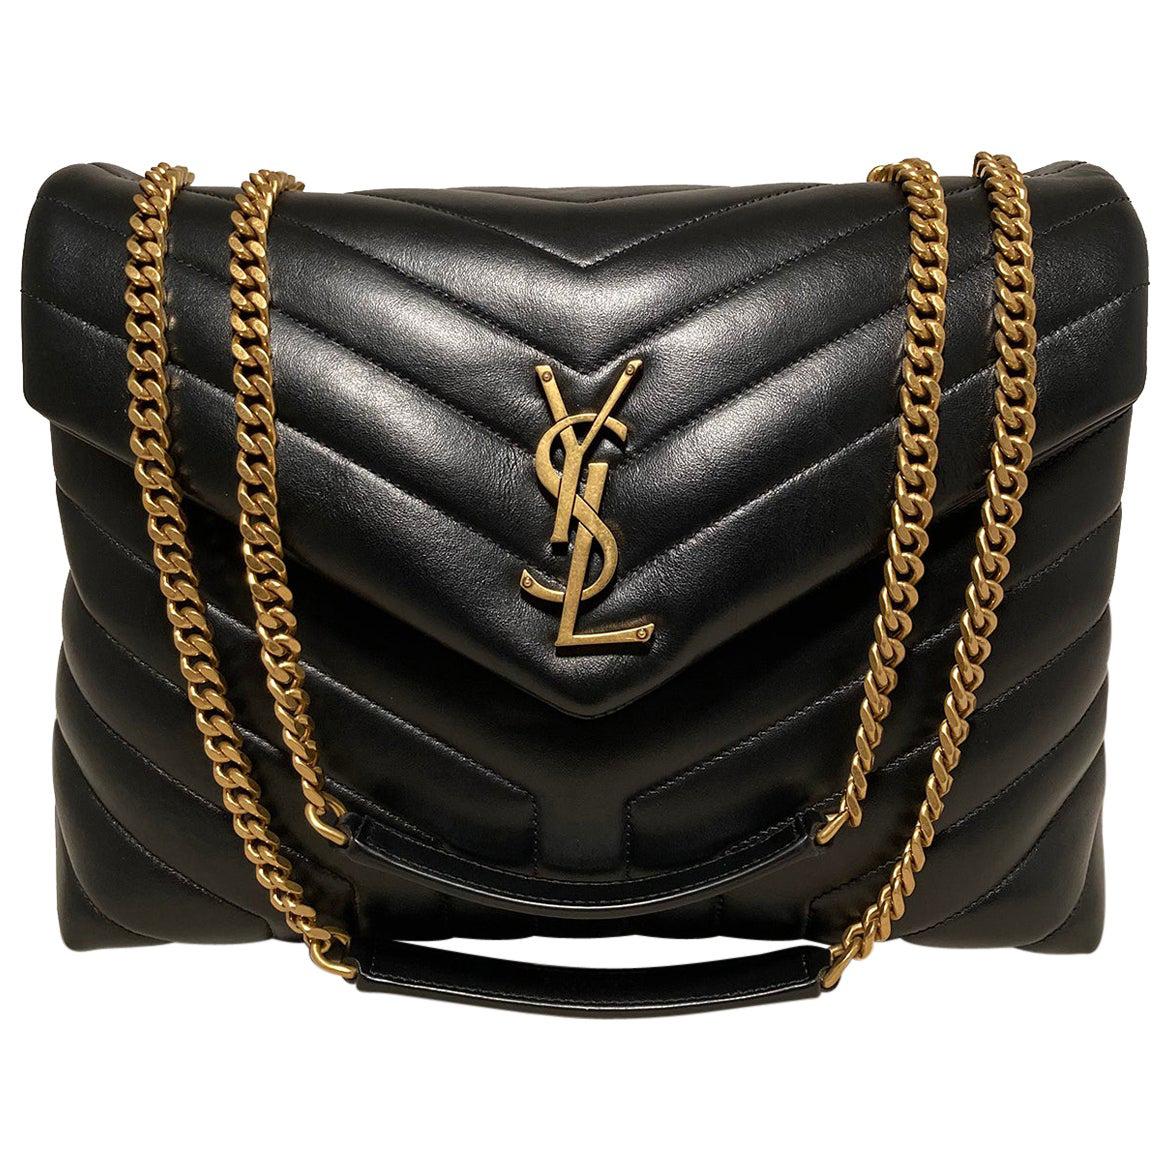 NWOT Saint Laurent Loulou Quilted Leather YSL Bag